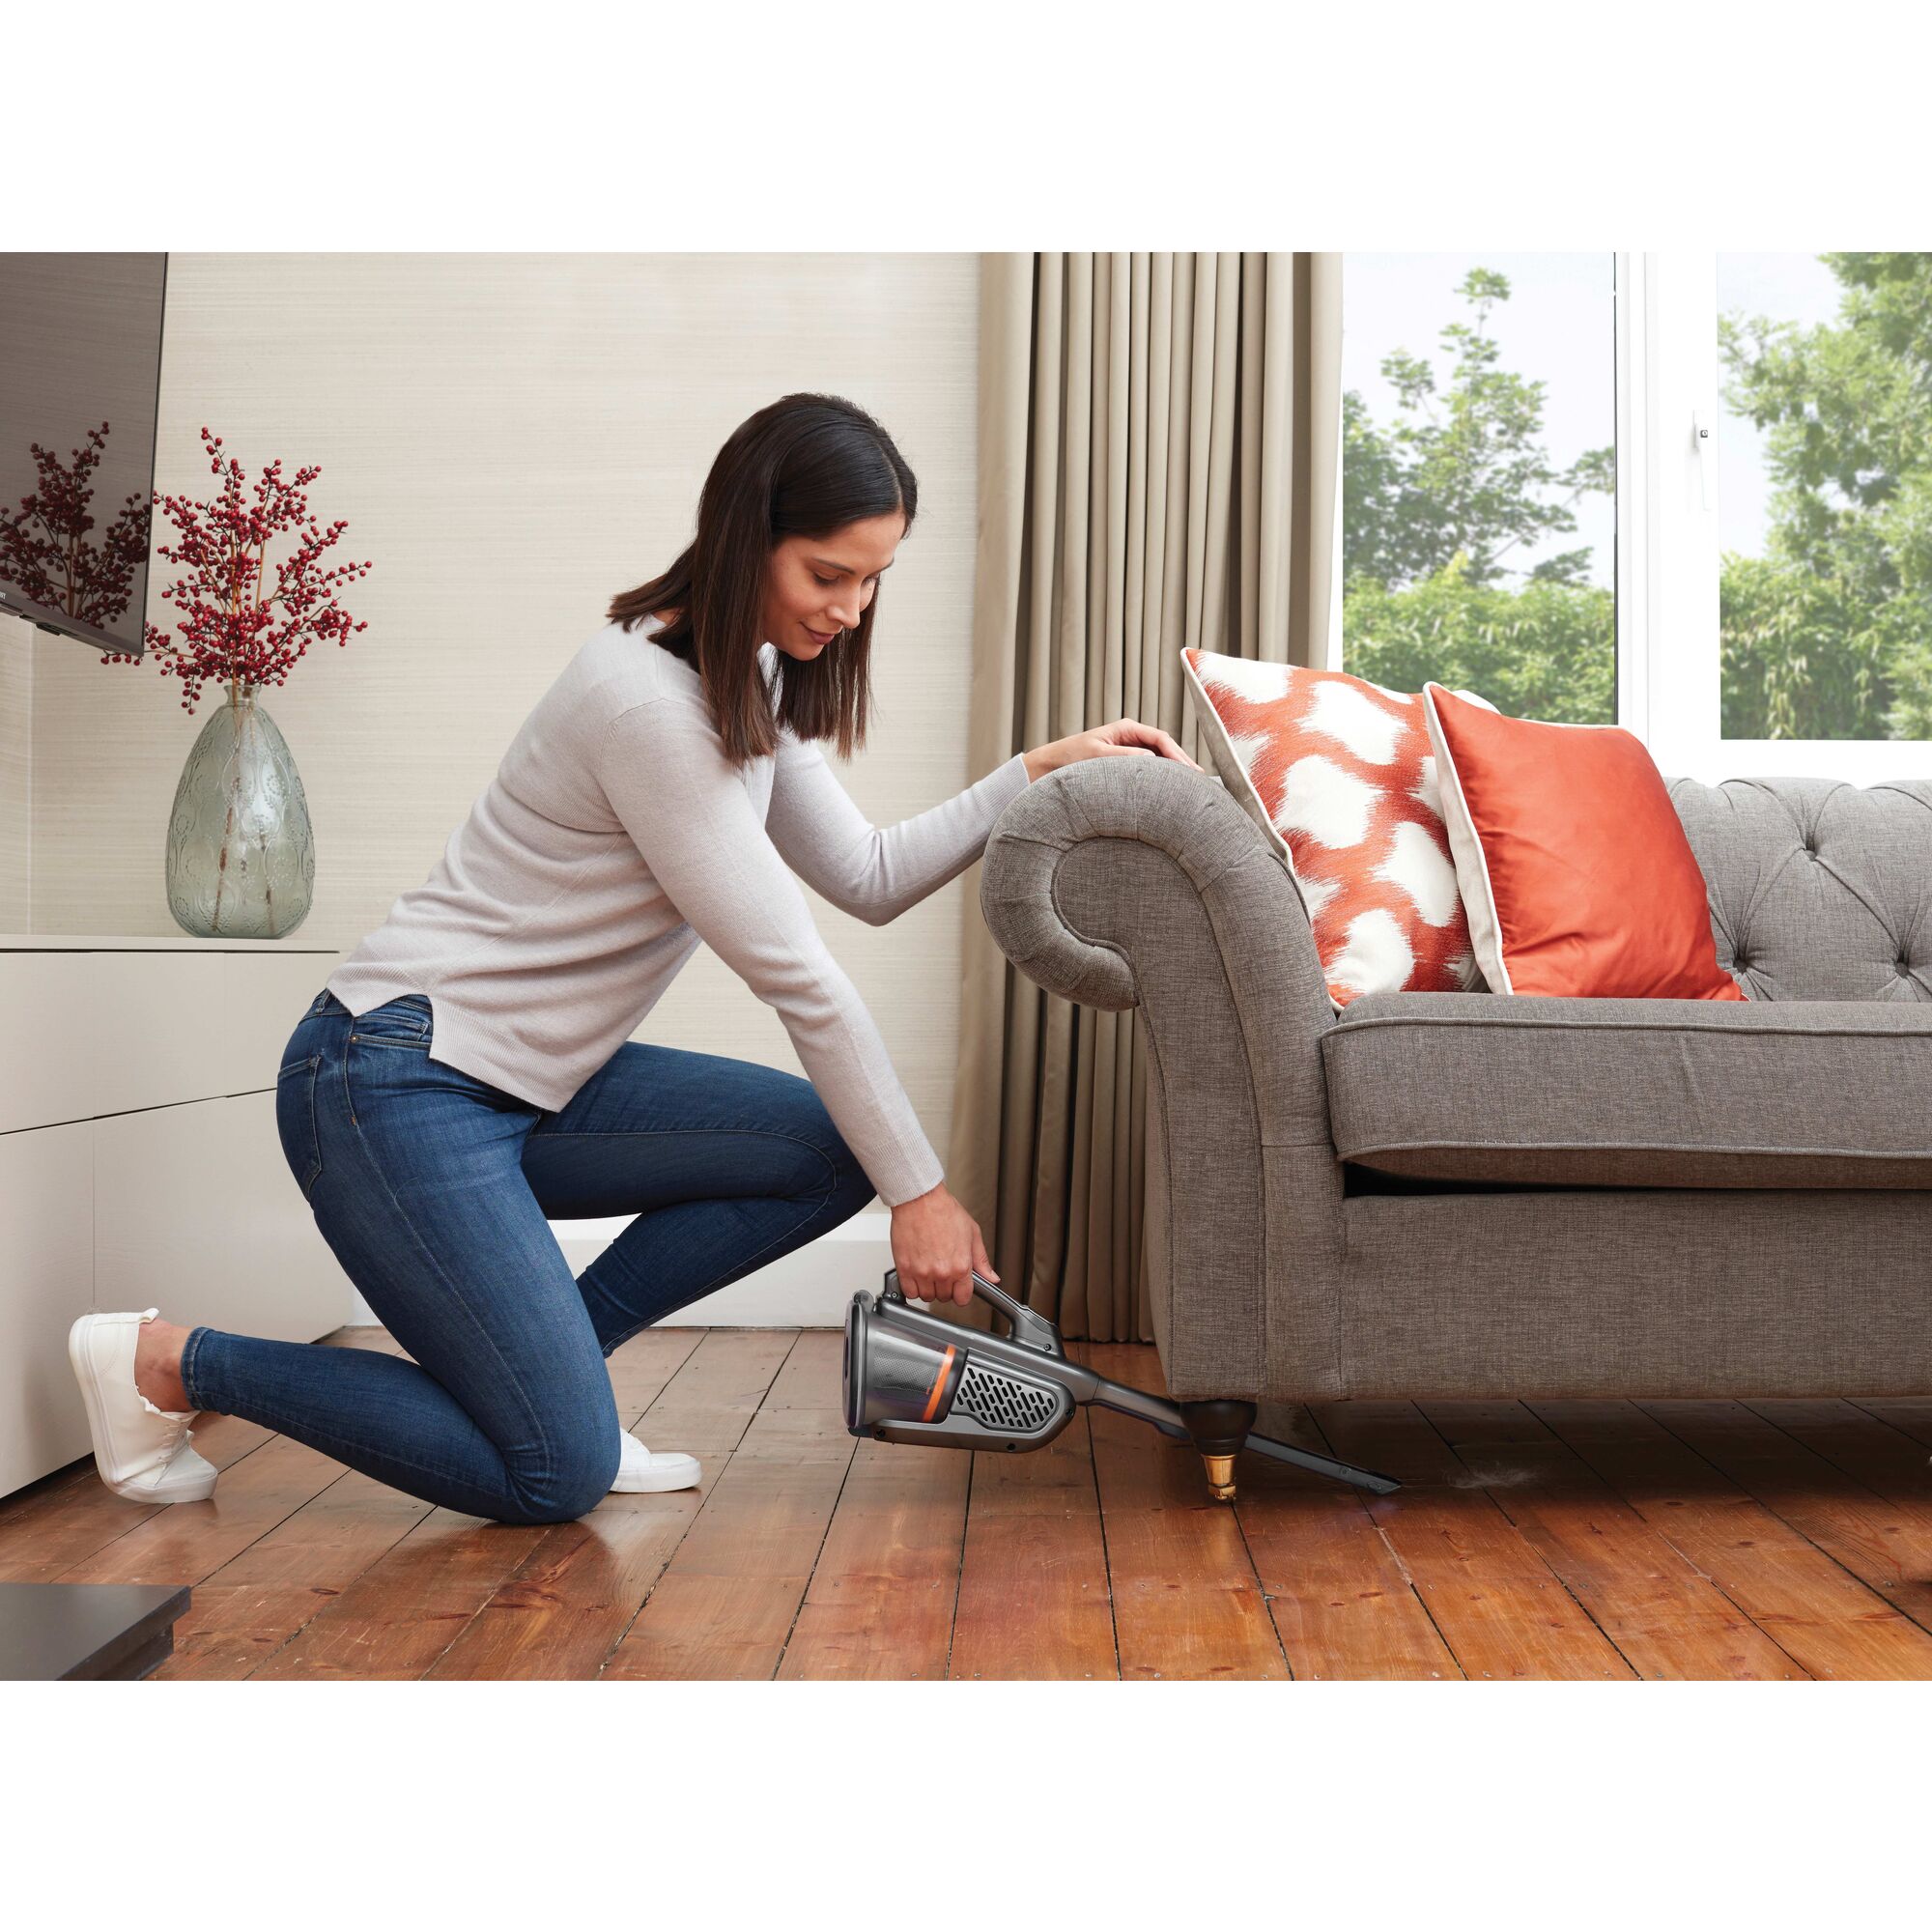 12 Volt Dust buster Advanced Clean Cordless Hand Vacuum being used by a person under a sofa.